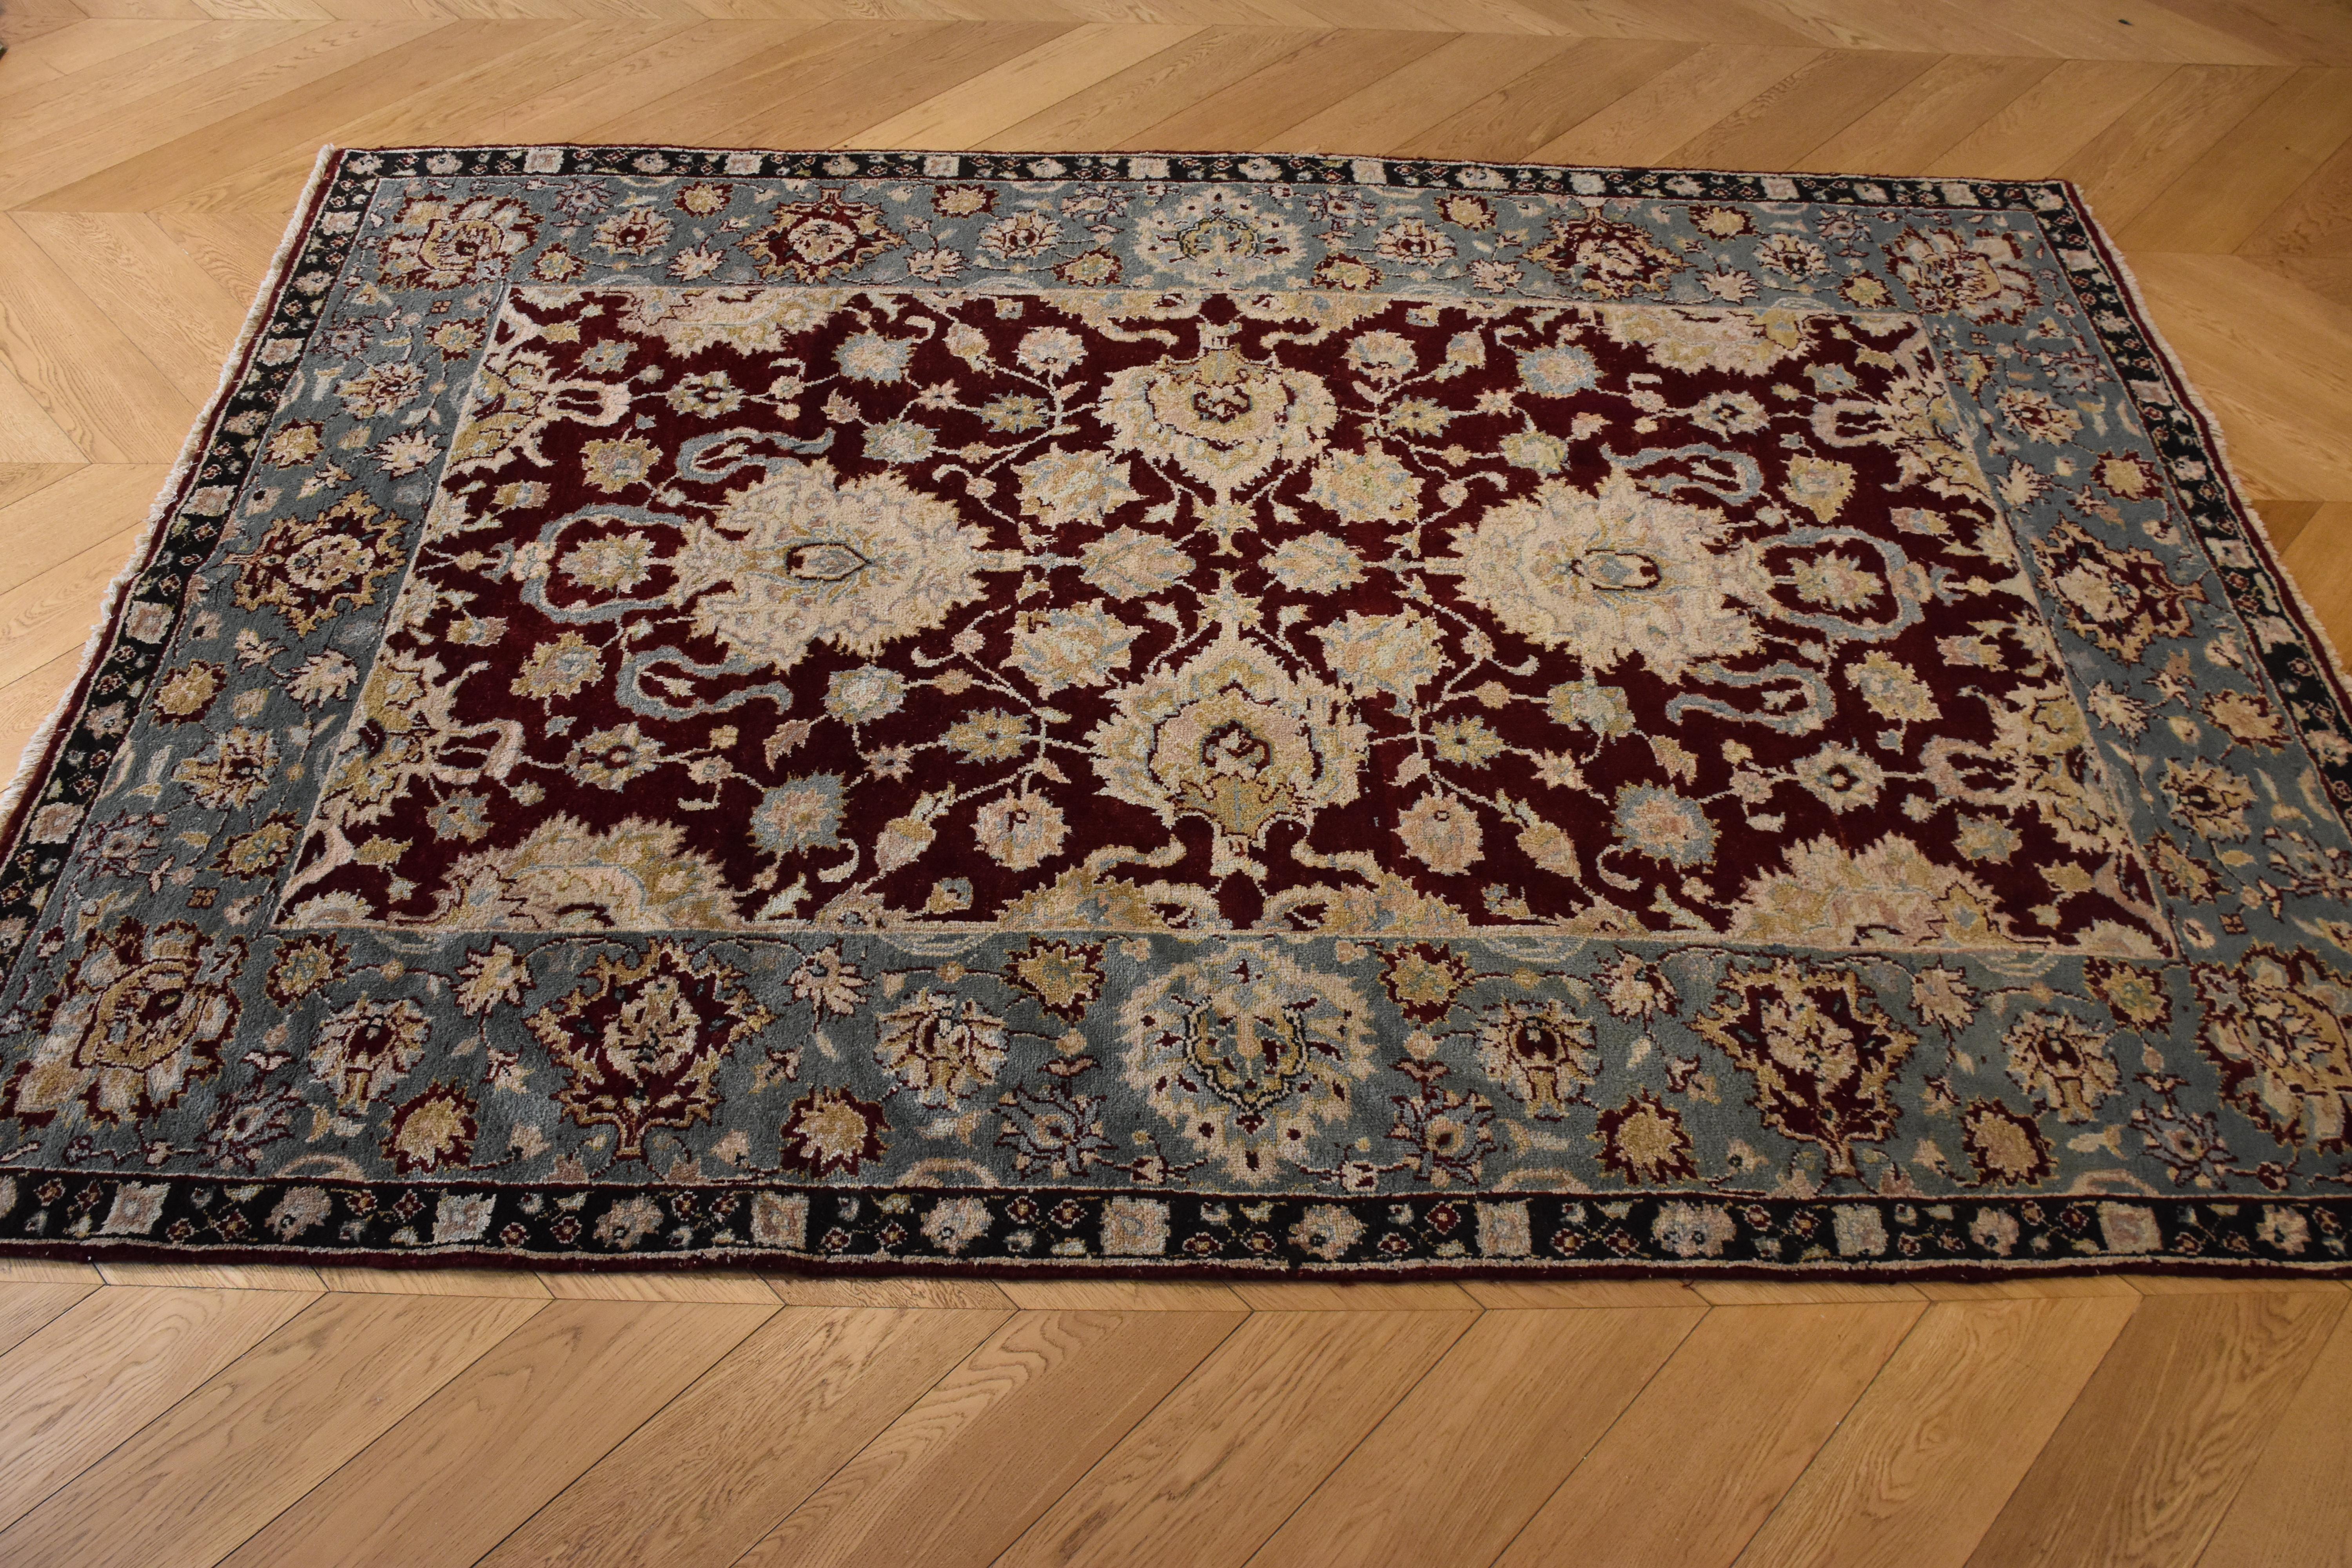 20th Century Green and Ruby Red in Wool Floreal Agra Indian Rug, circa 1900s For Sale 11